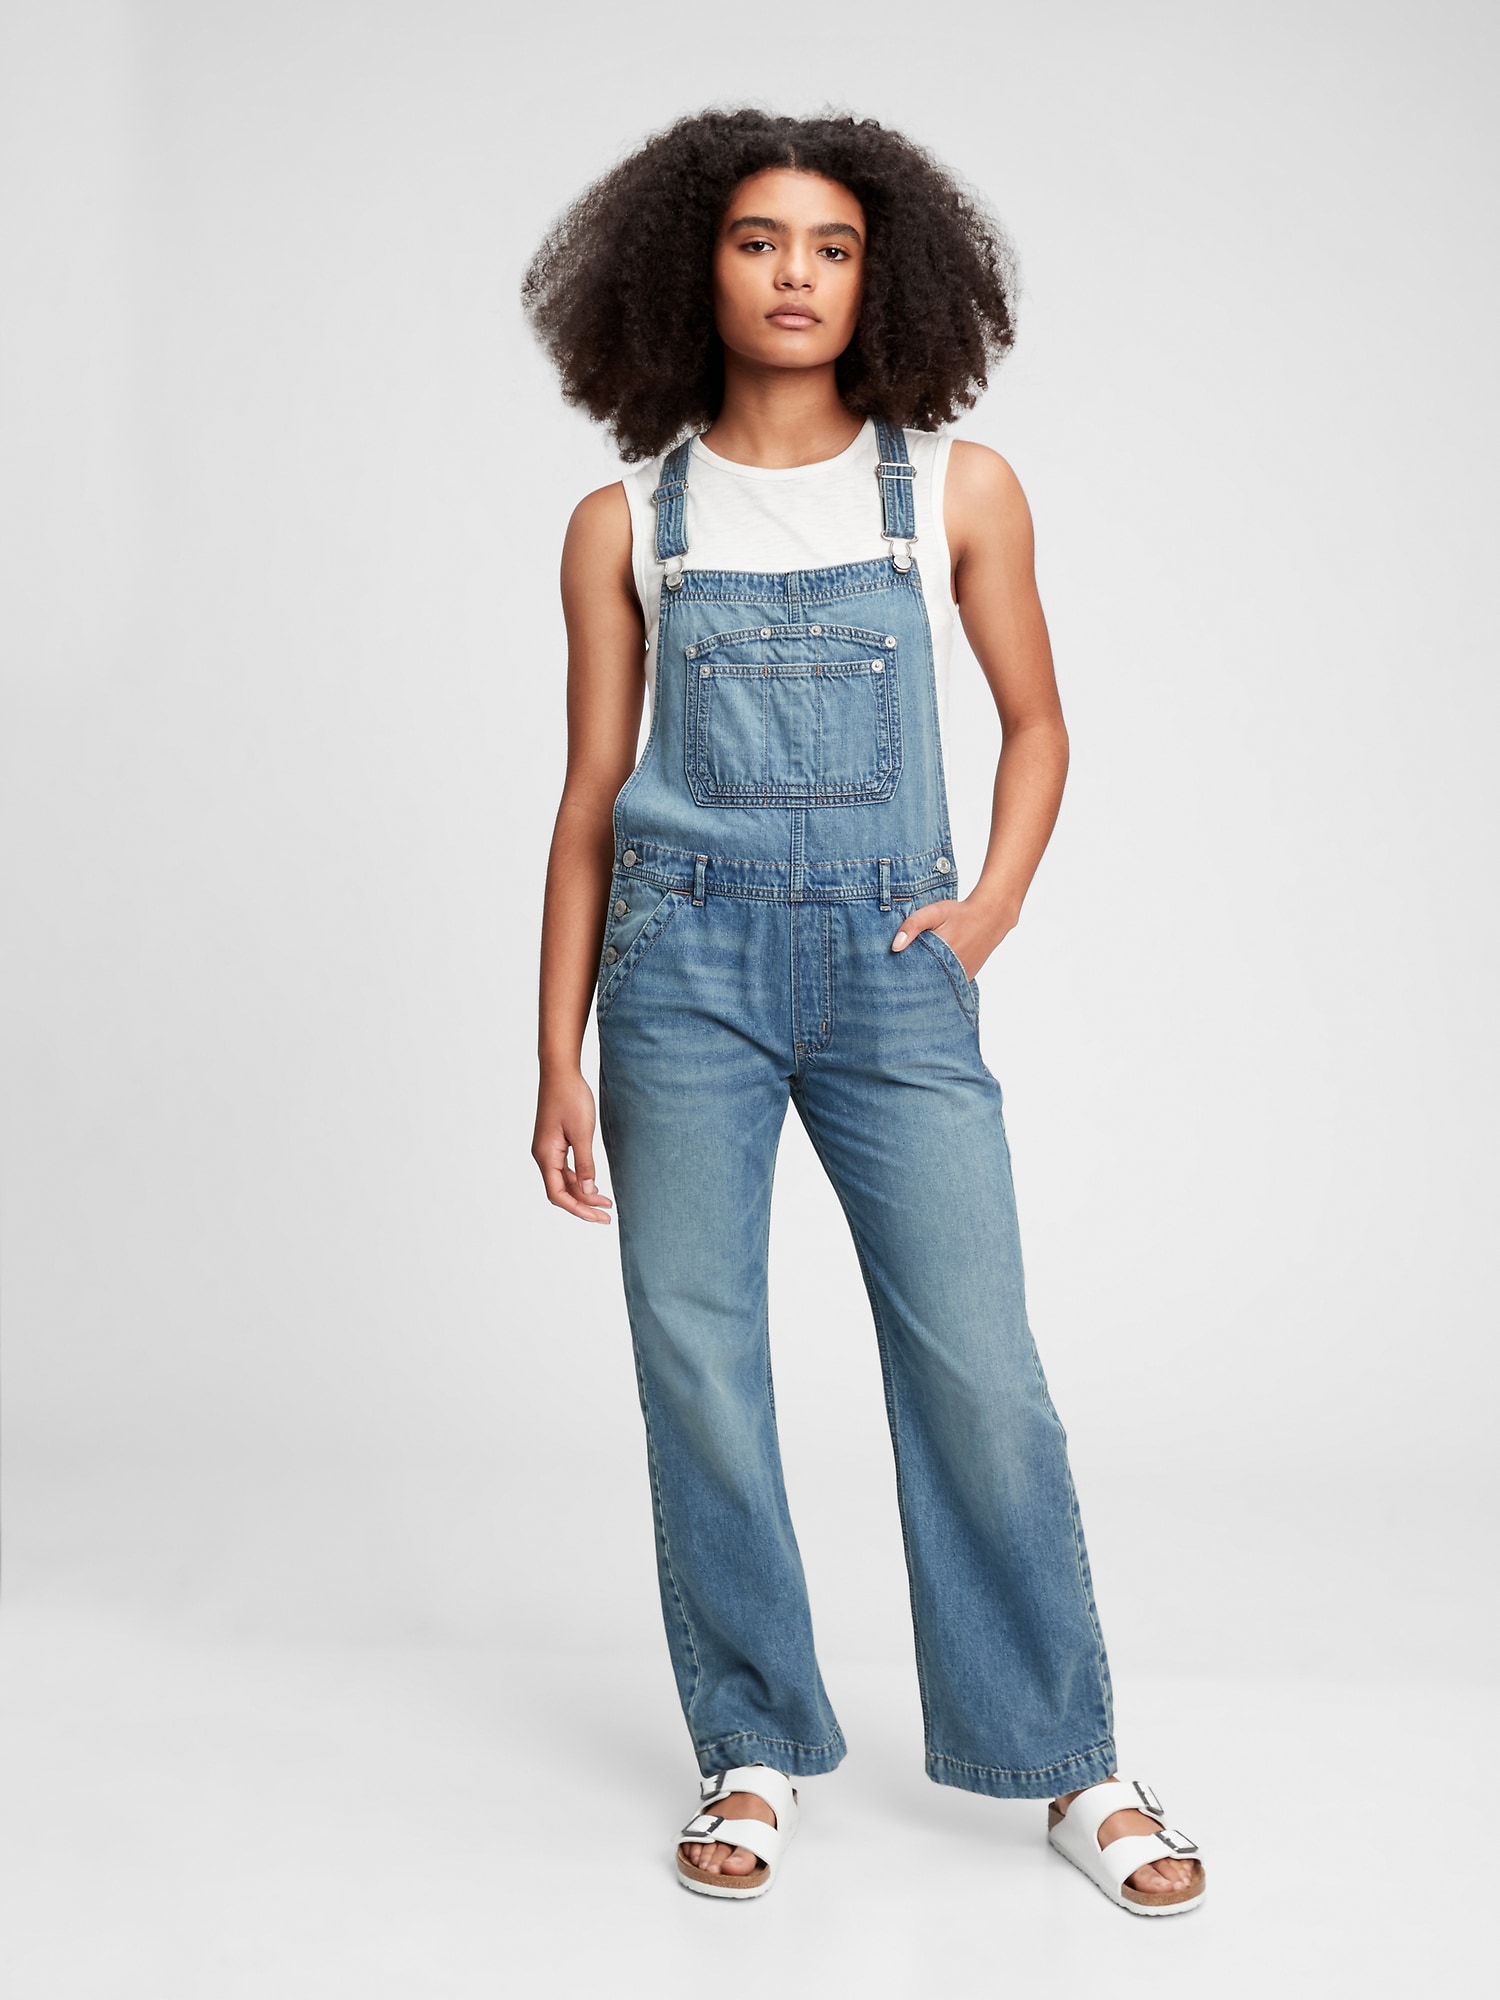 👖Choose Which Retro Fashion Fads 👗 to Revive and We’ll Reveal Your Age Group Overalls